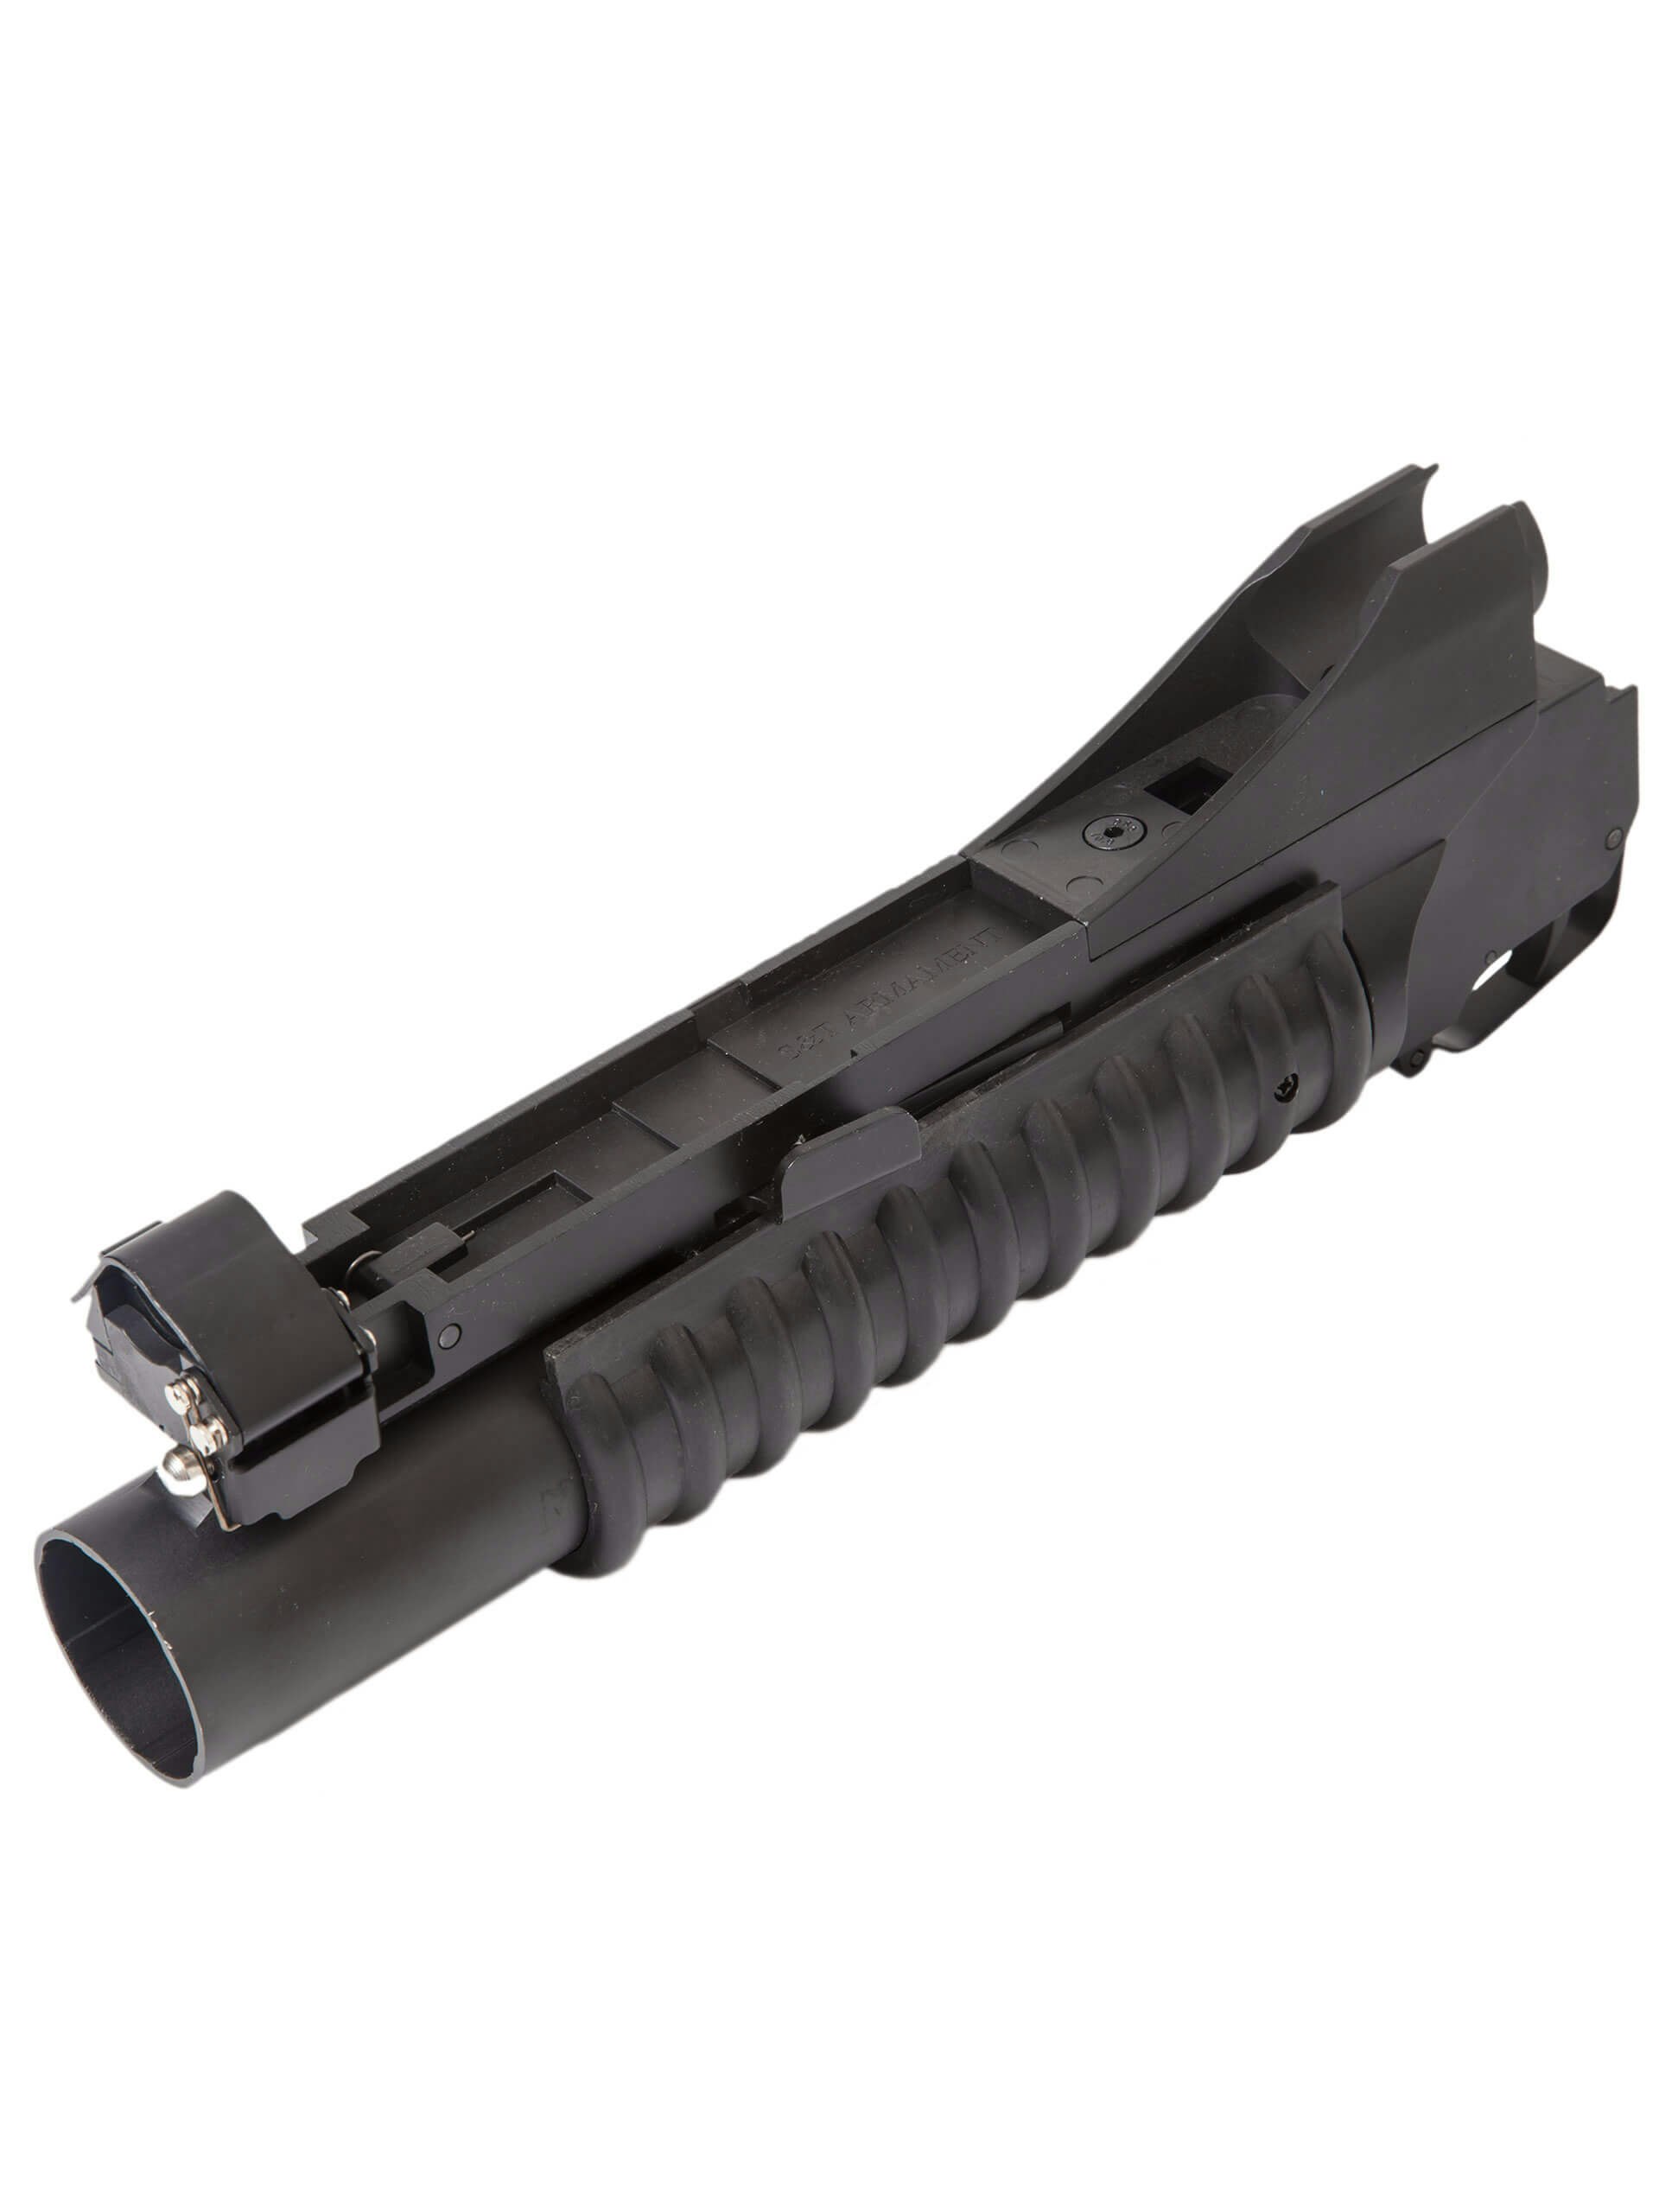 S T M3 Style Grenade Launcher Polymer